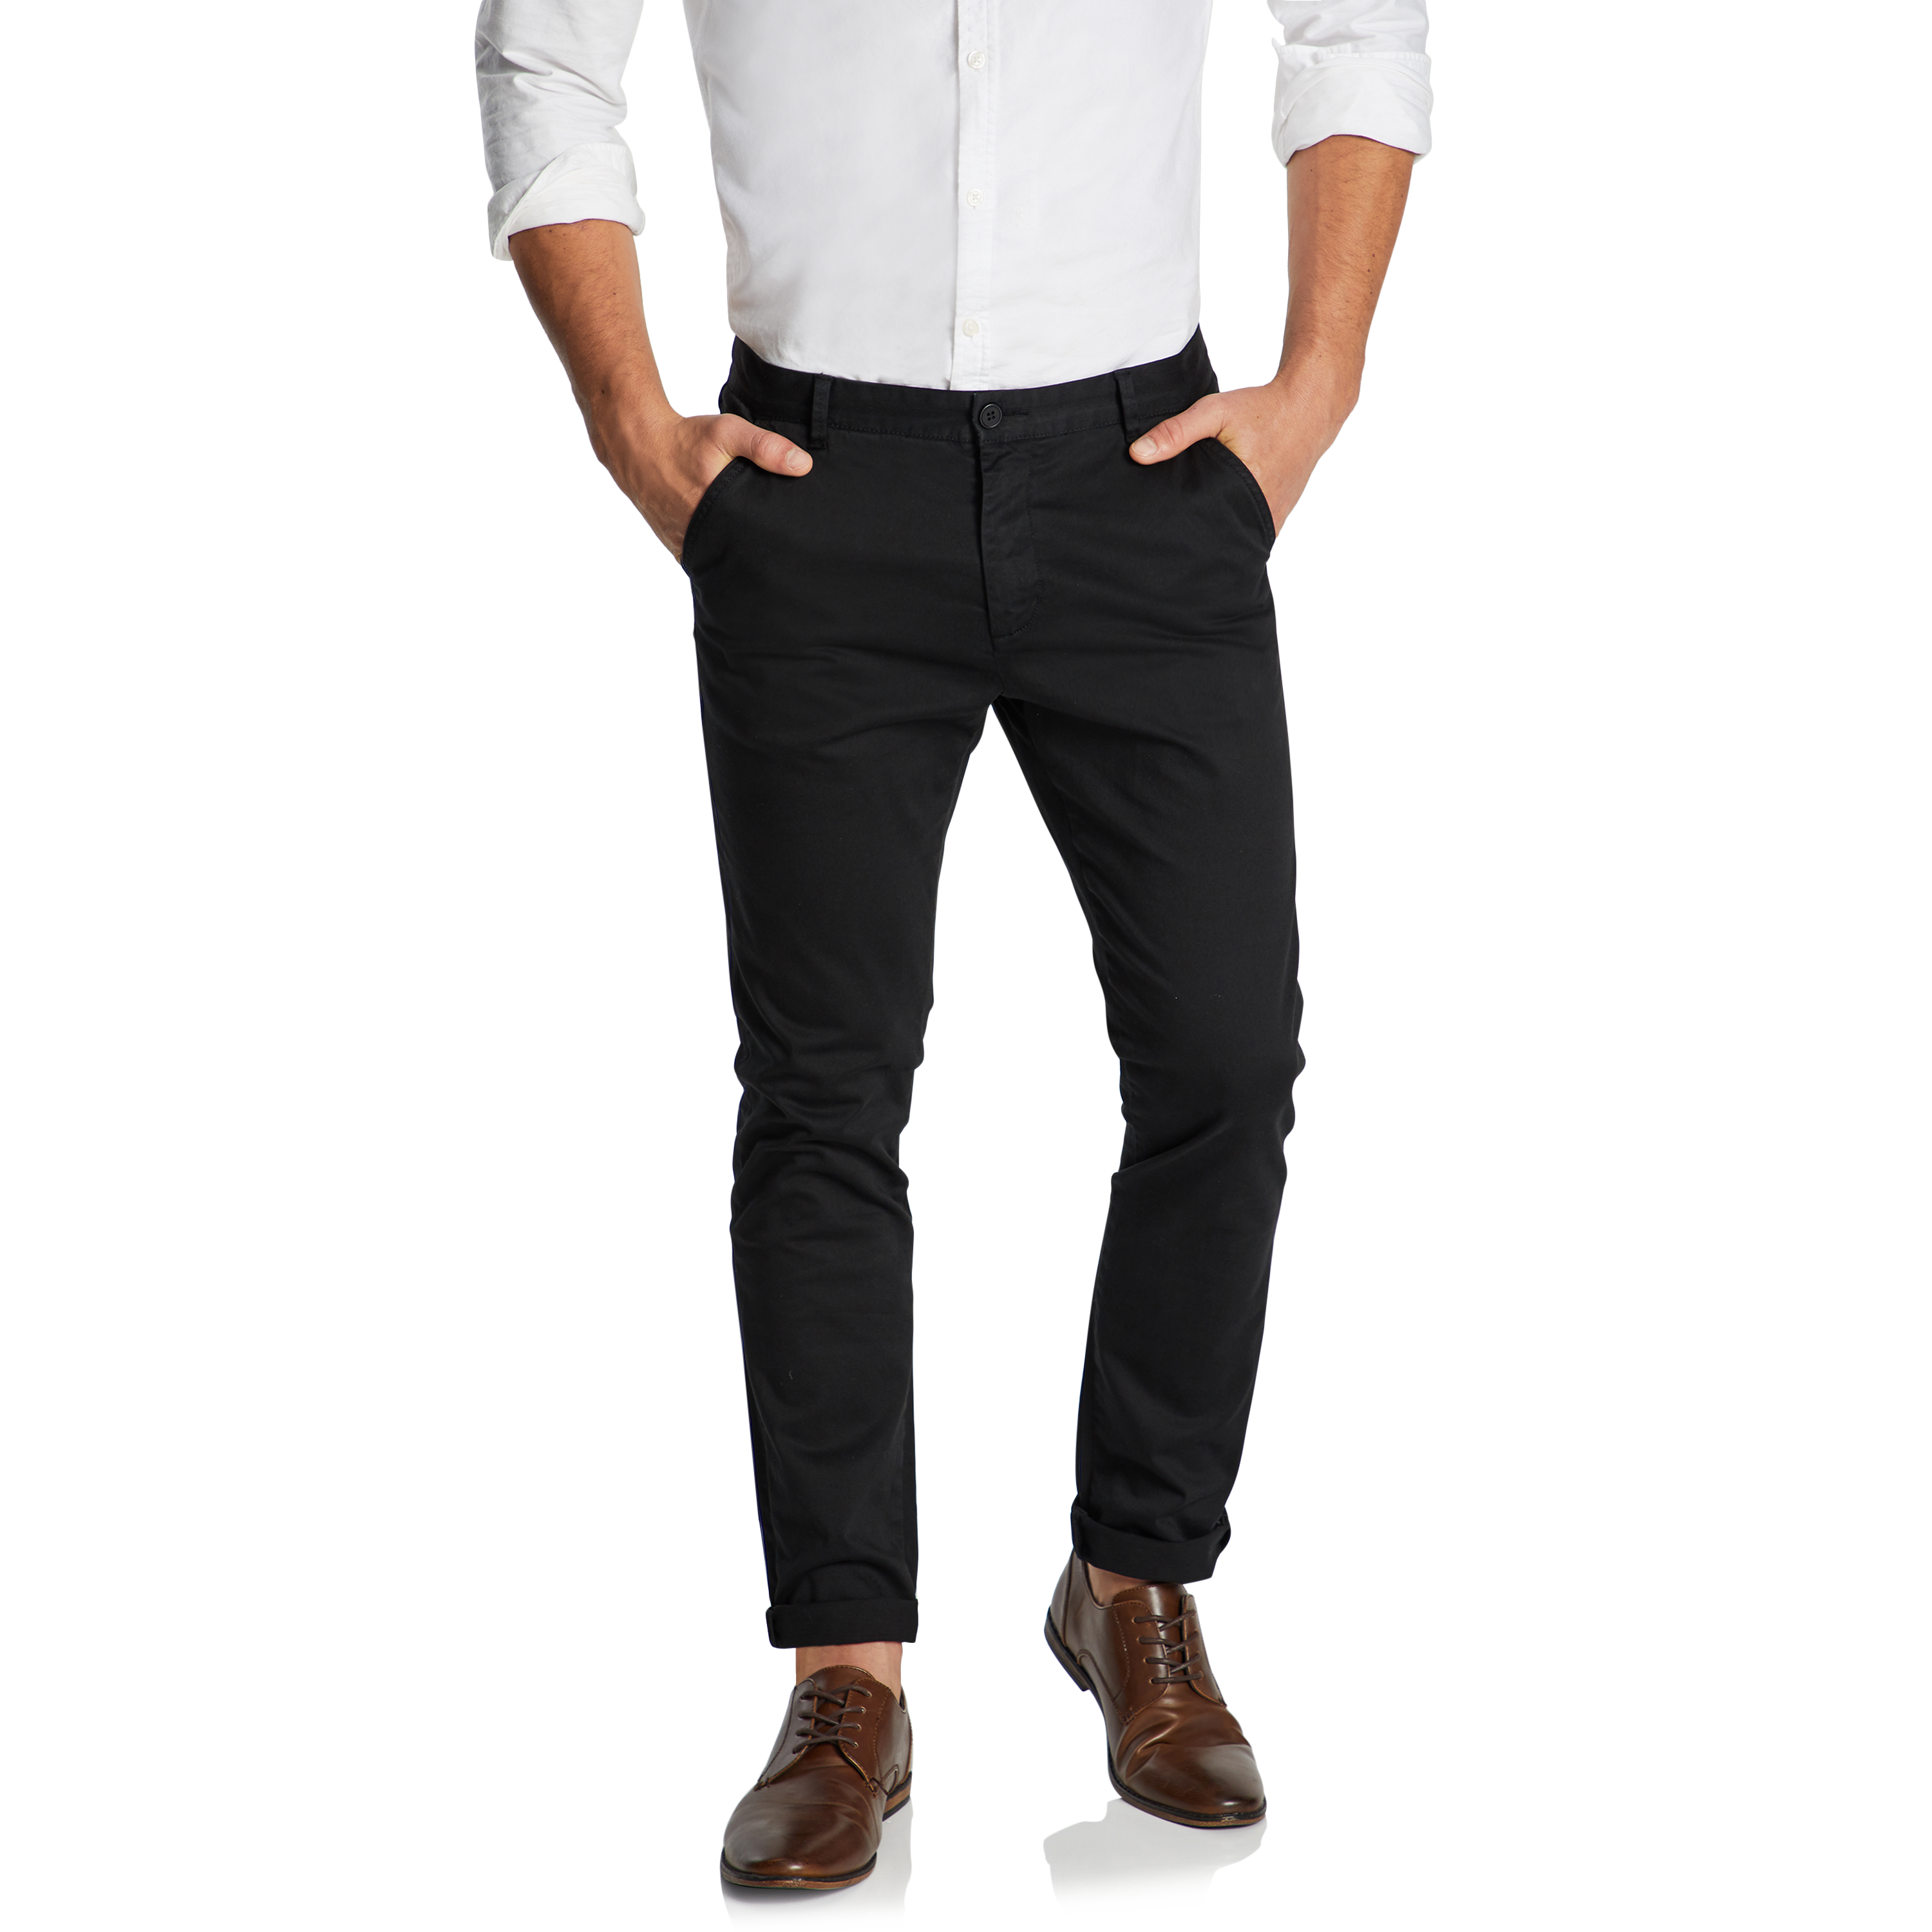 Mens Chinos for the Athleisure Look Combining Comfort and Style